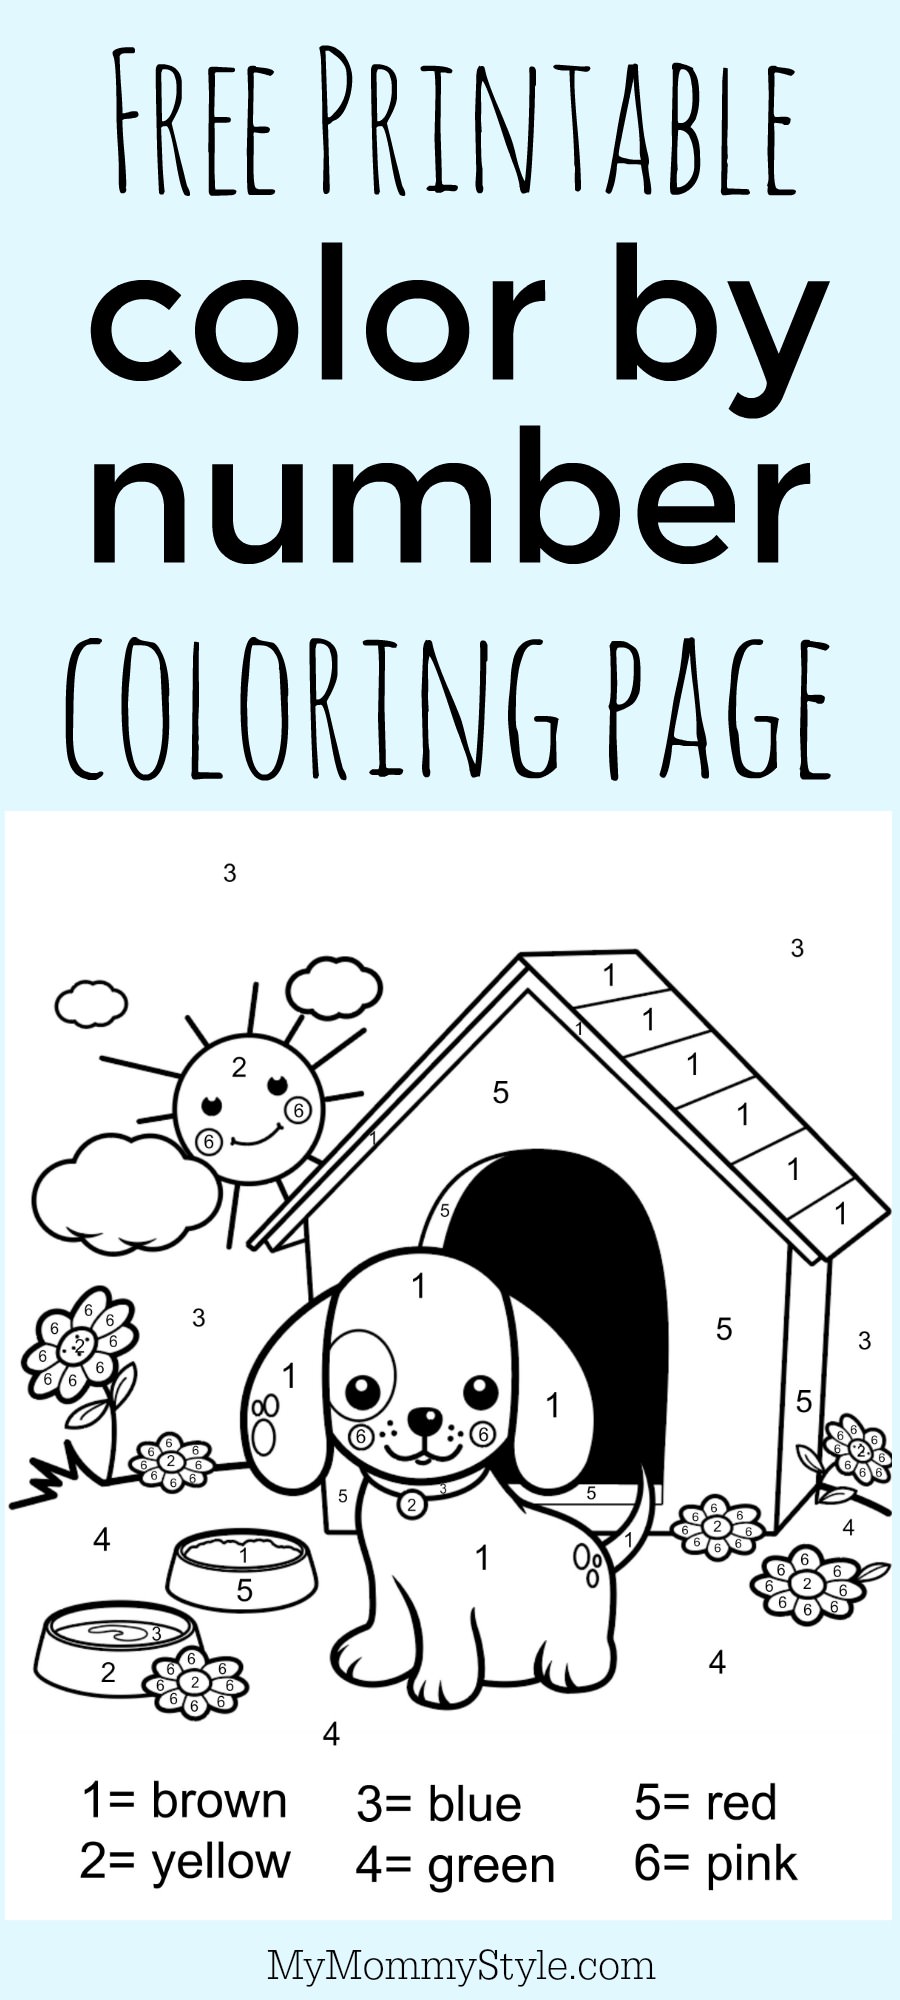 Color by number coloring page free printable My Mommy Style